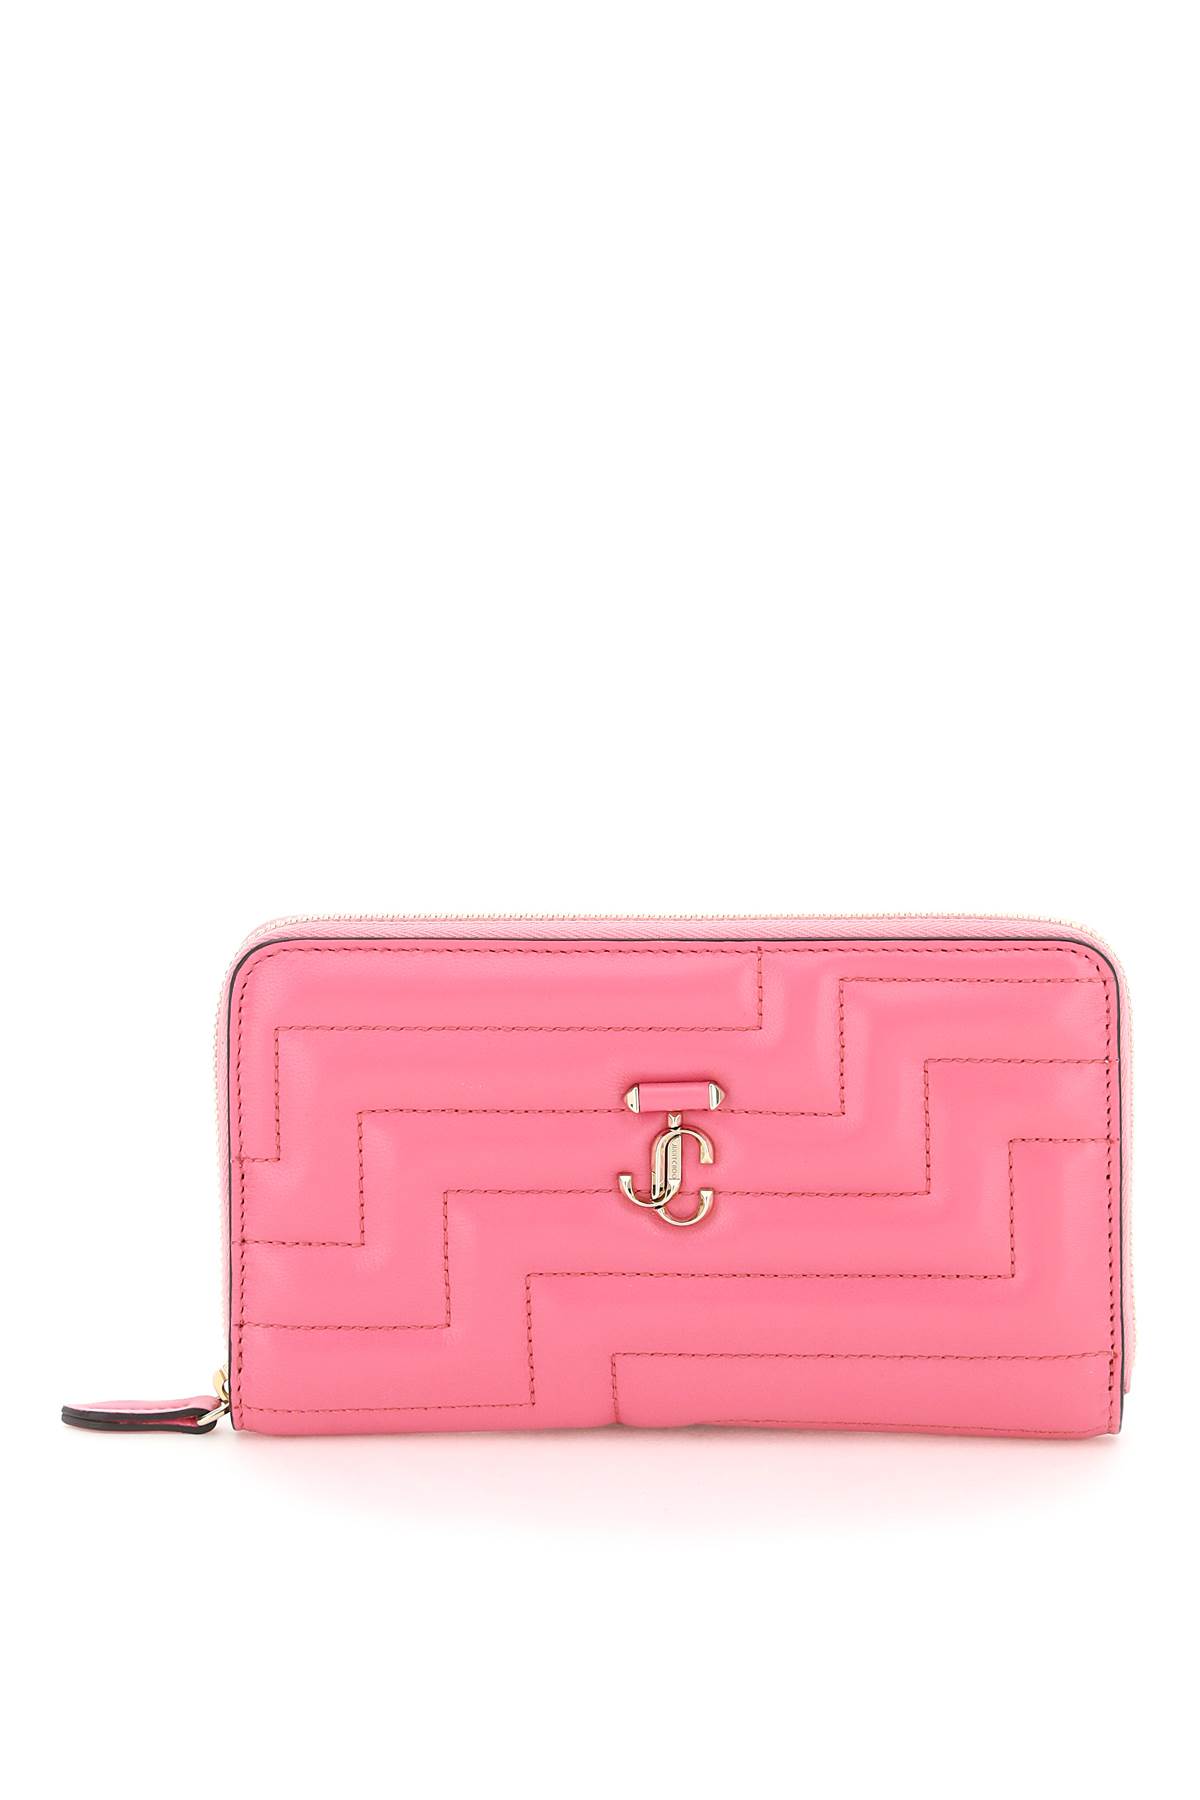 Jimmy Choo Zip Around Quilted Nappa Wallet